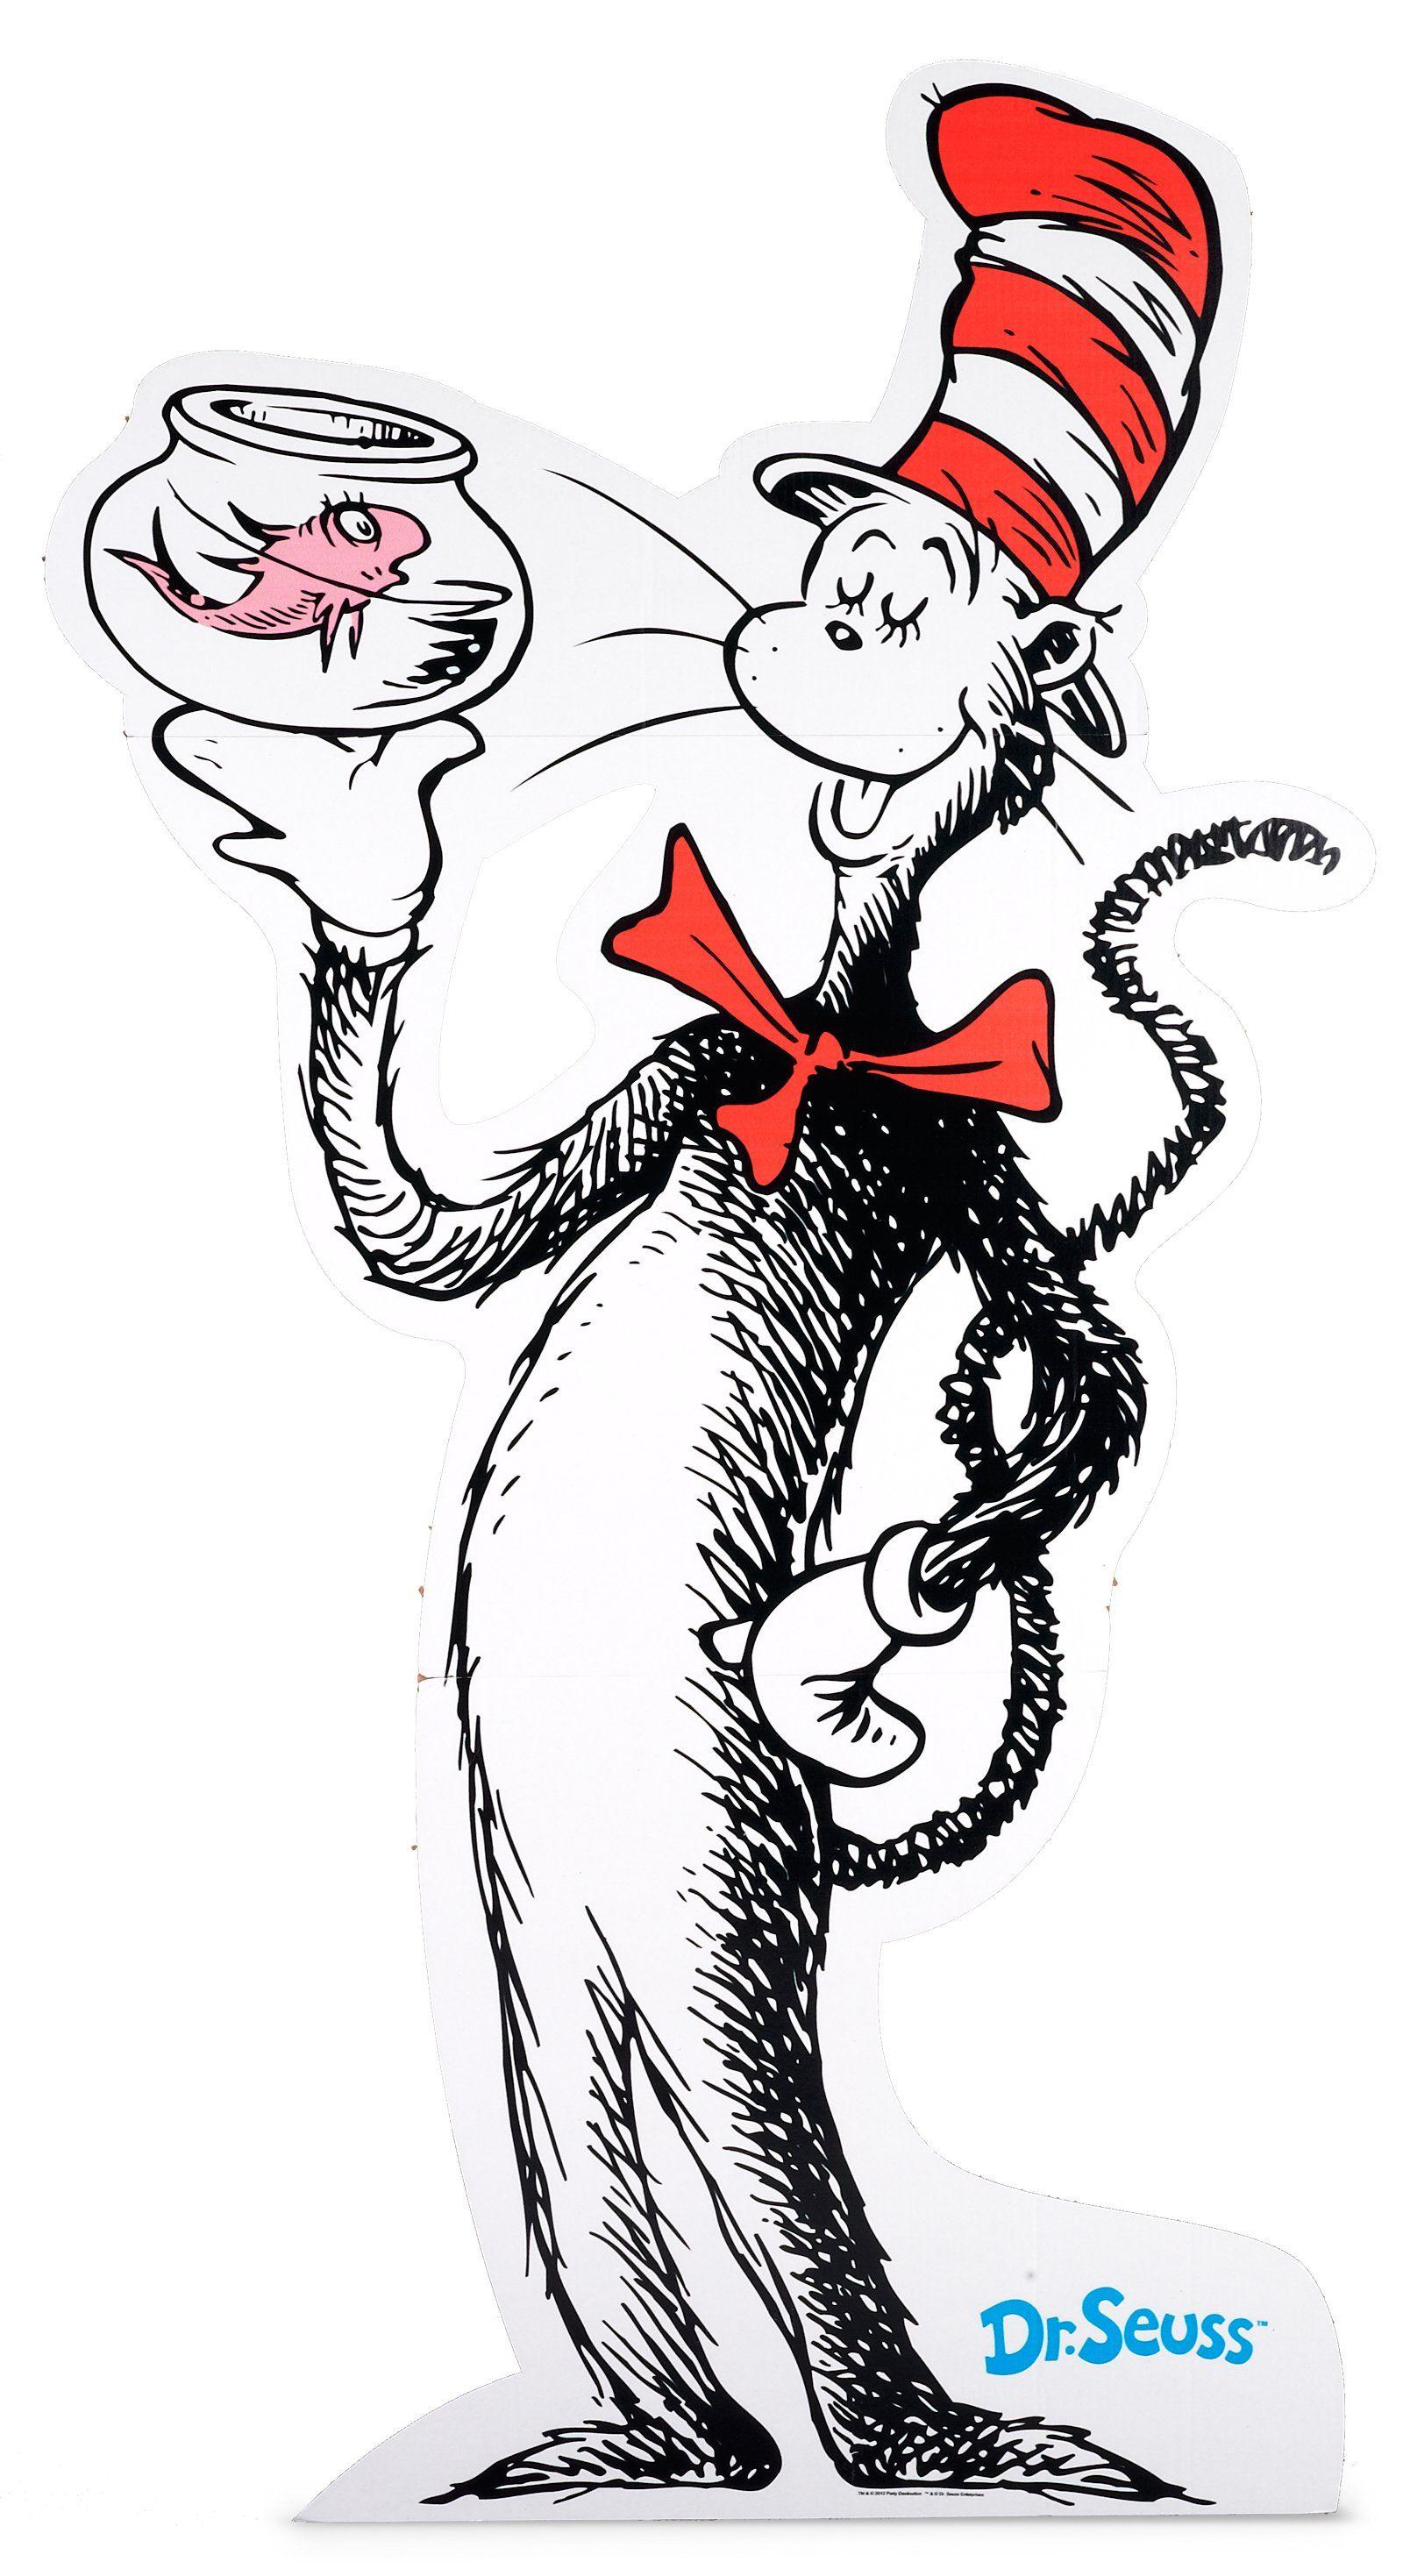 Dr. Seuss: The Cat In The Hat wallpaper, Video Game, HQ Dr. Seuss